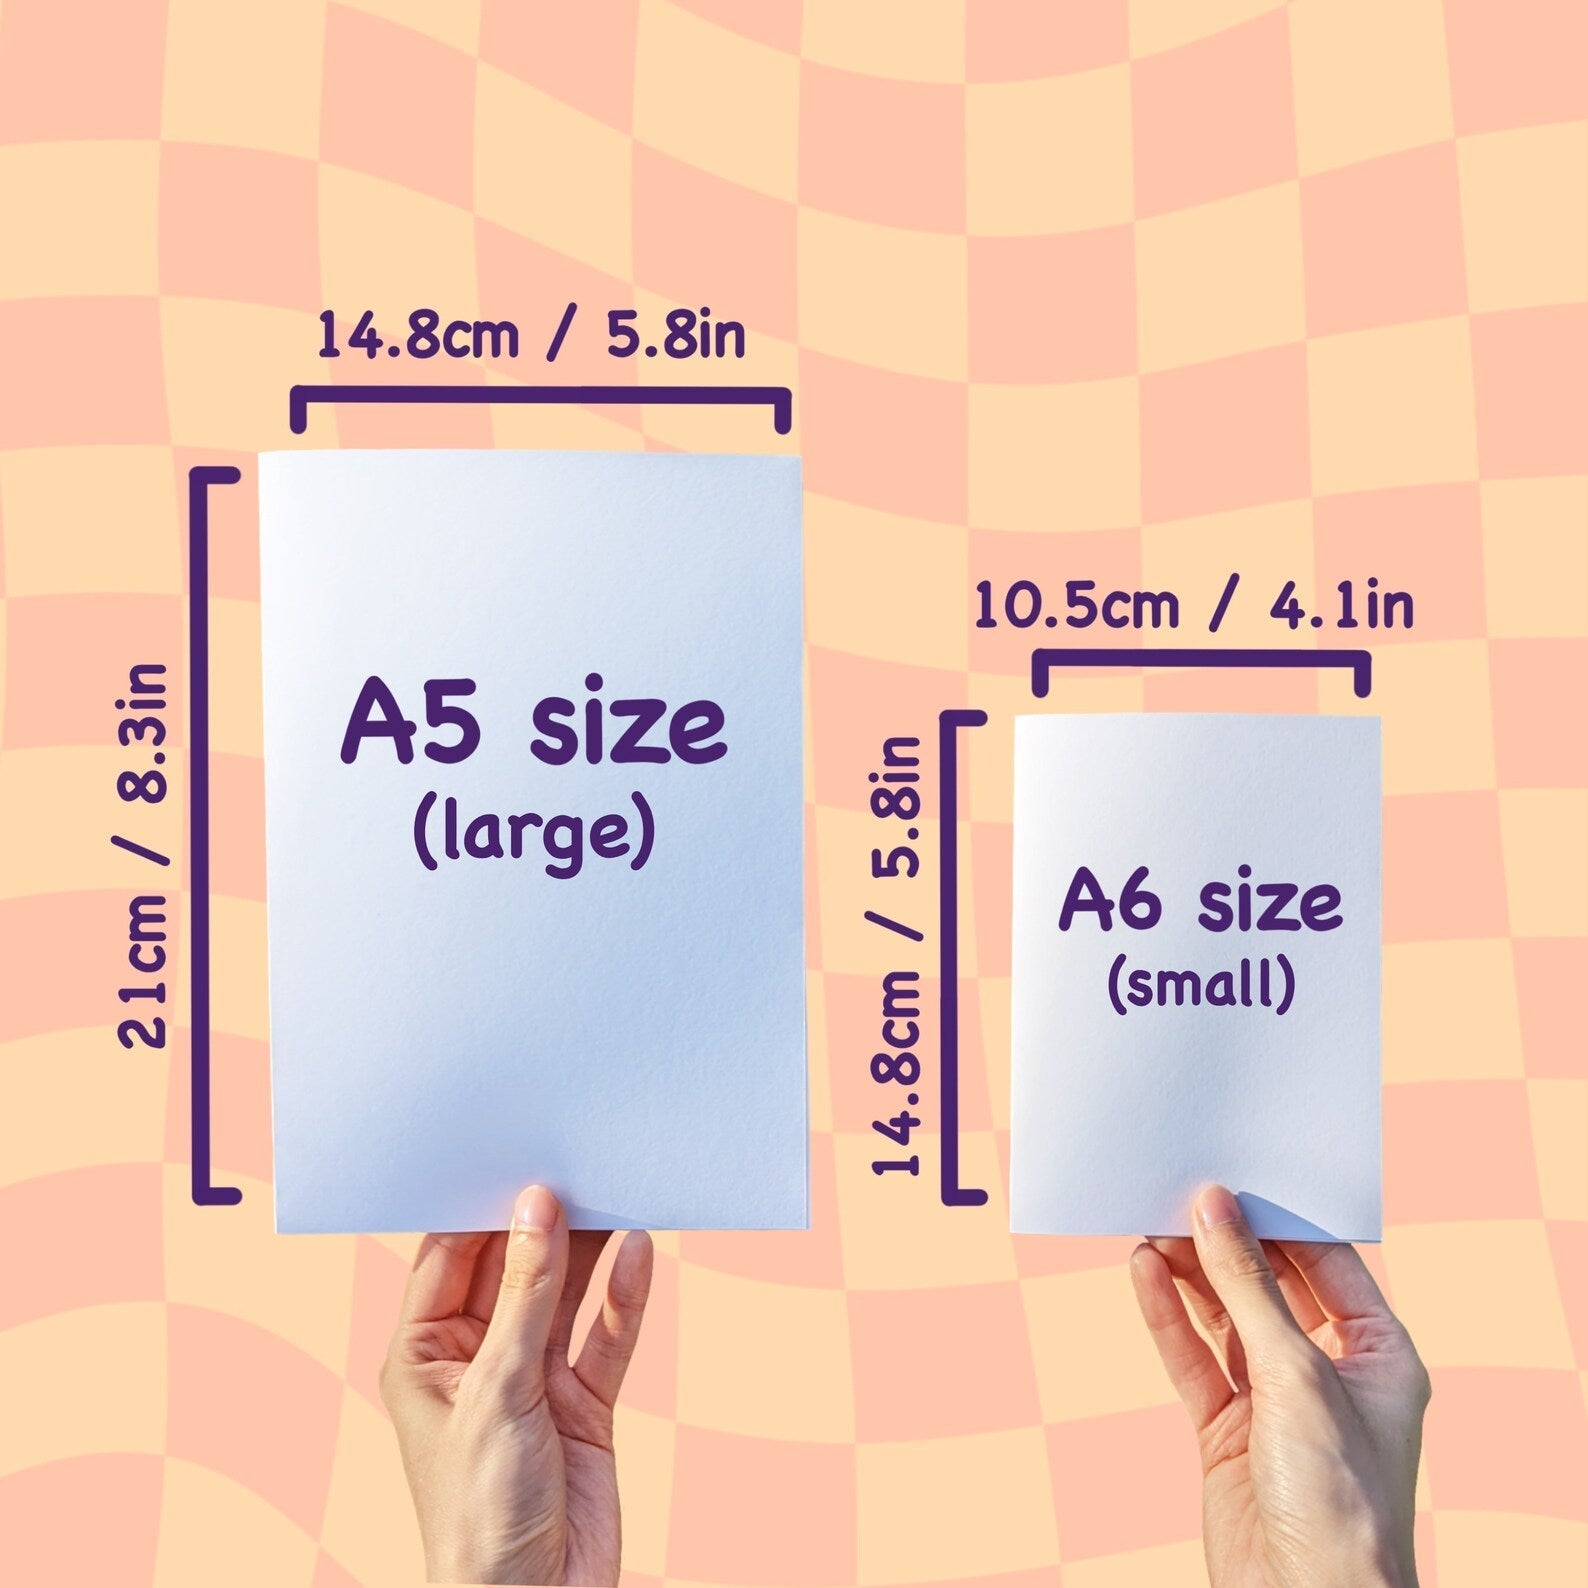 Two sizes of greeting cards: A5 (large) and A6 (small).